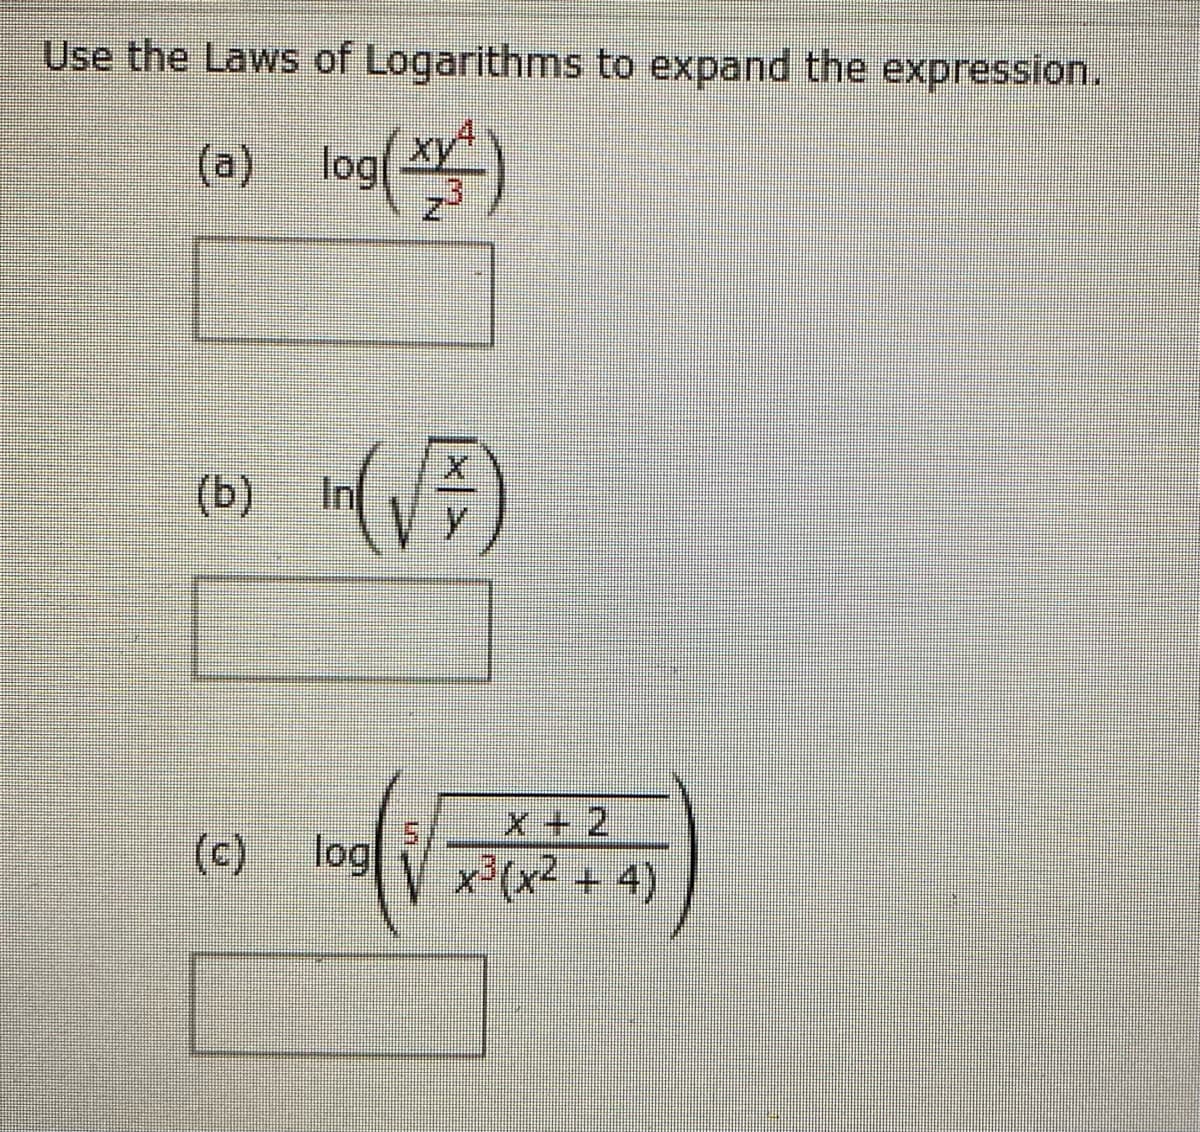 Use the Laws of Logarithms to expand the expression.
(a) log(X
(b)
In
X + 2
(c) log
V x'(x² + 4)
